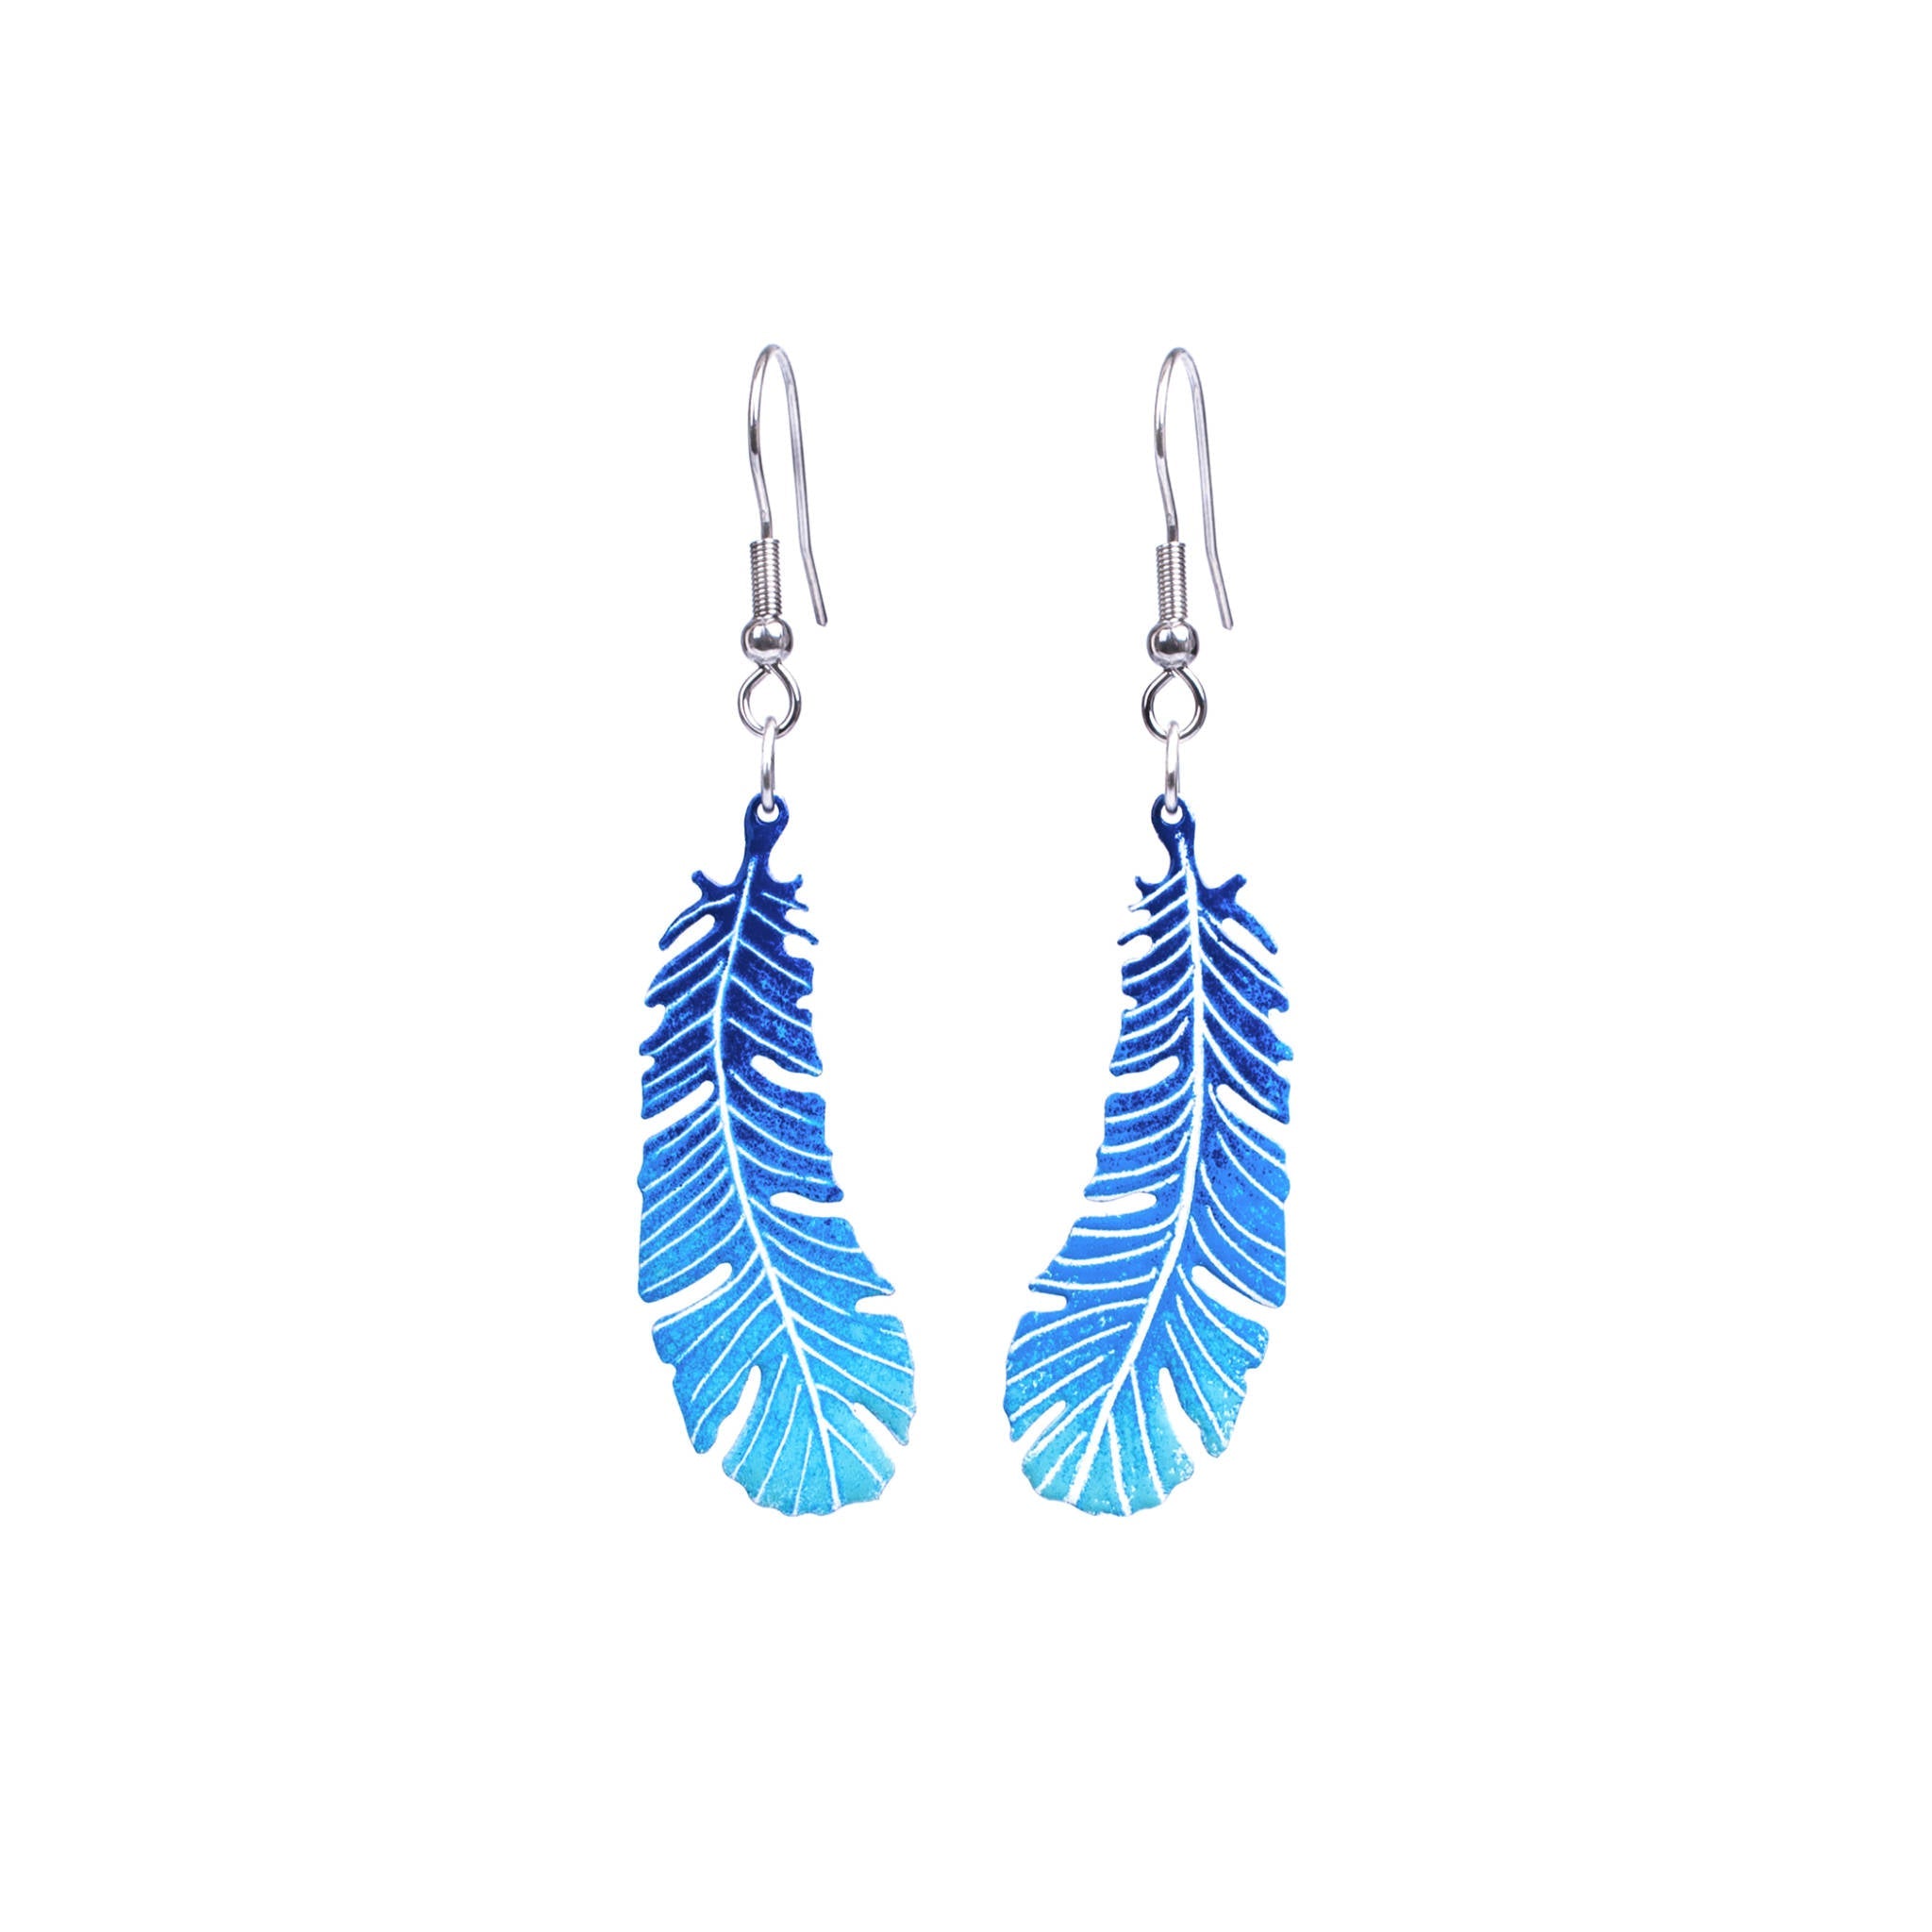 Discover 234+ light blue feather earrings best